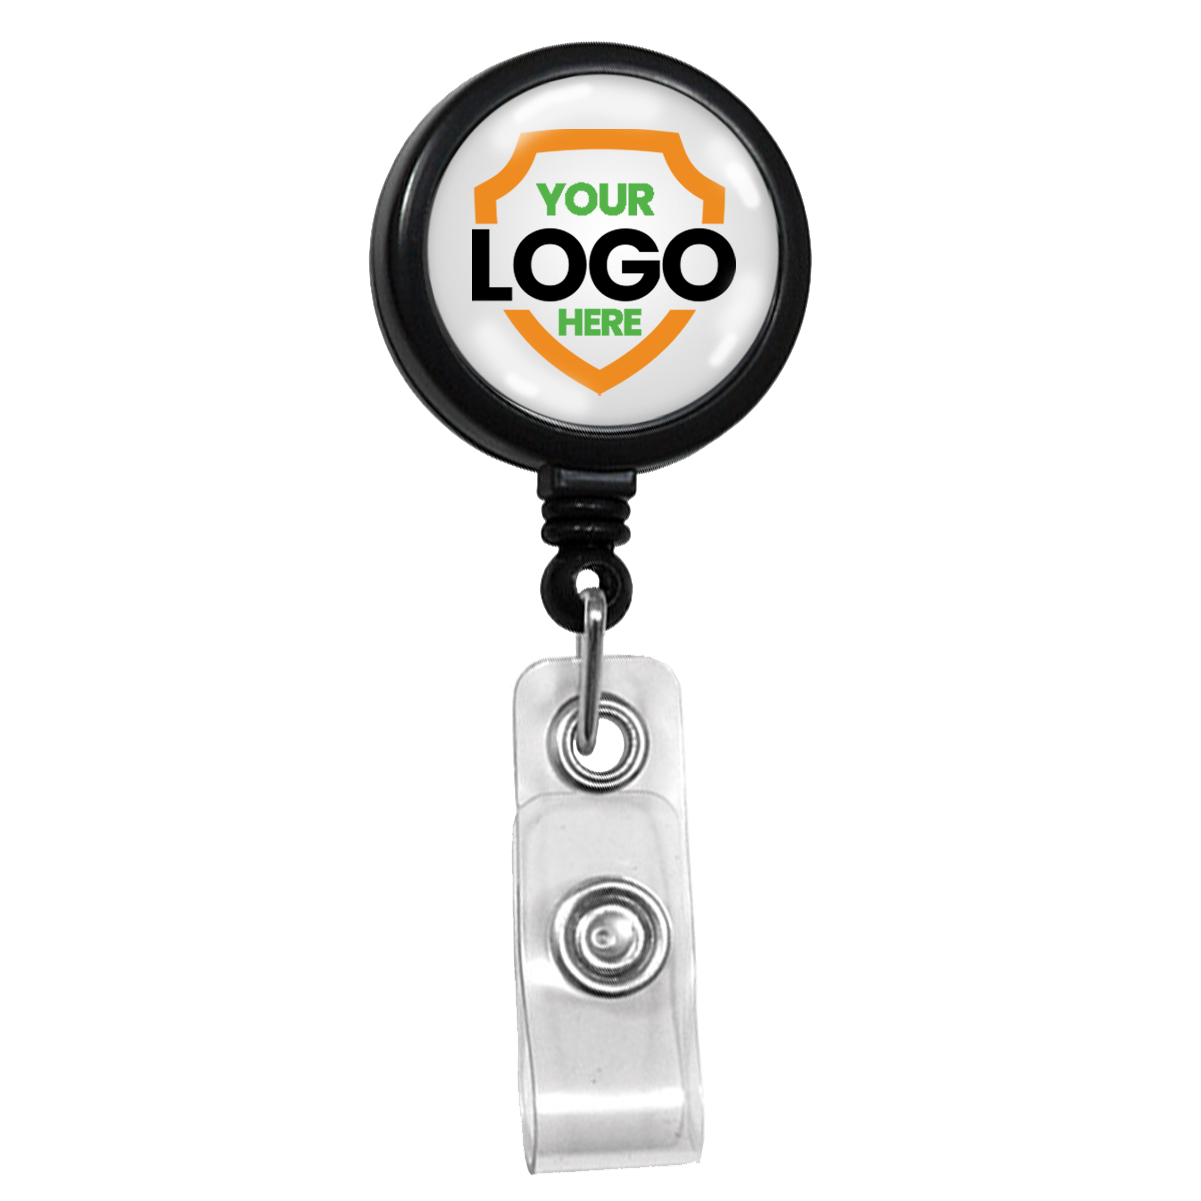 A Custom Max Label Badge Reel with 1 Inch Smooth Face and Swivel Spring Clip - Personalize with Your Logo, featuring a customizable area labeled "Your Logo Here" on a shield background. Perfect for promoting brand awareness and maintaining a professional image.